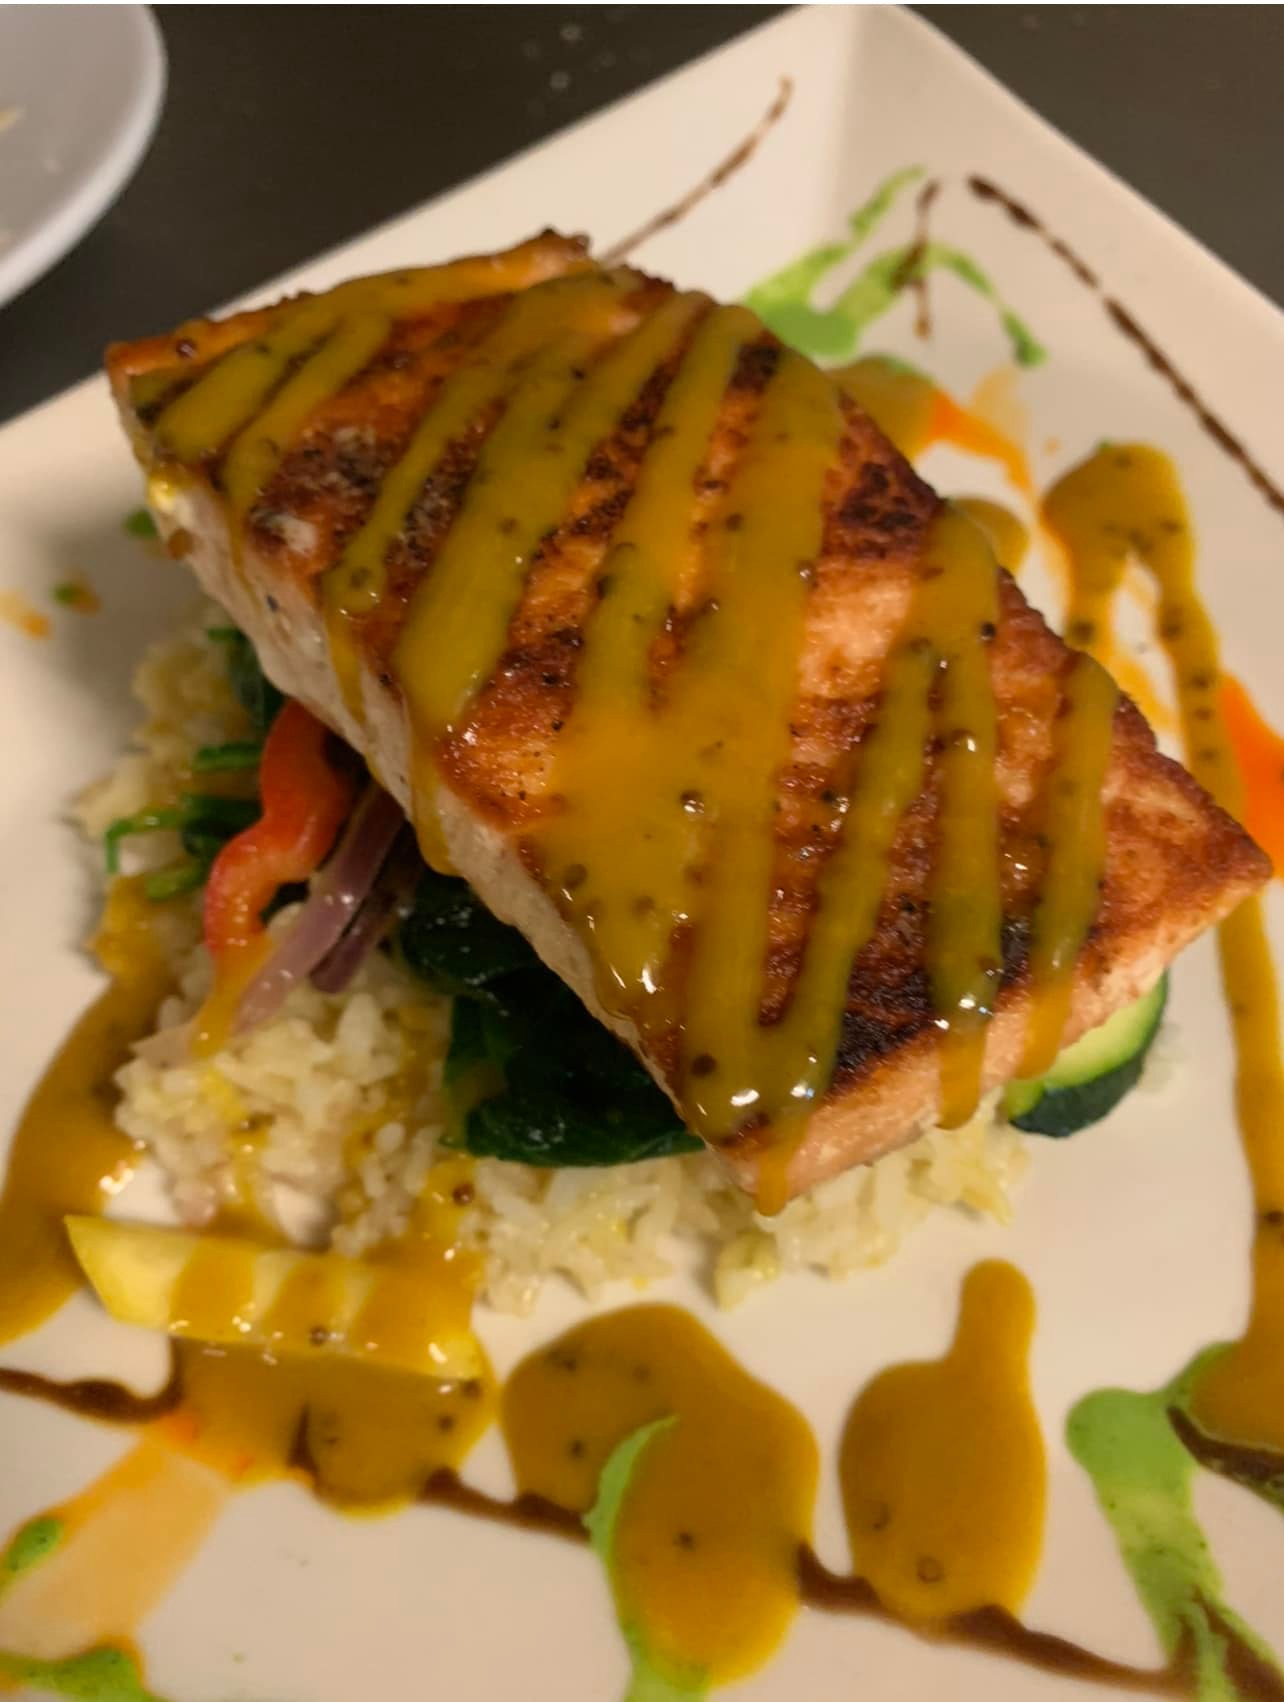 A salmon filet sits on a plate, with basmati rice and sauteed vegetabales